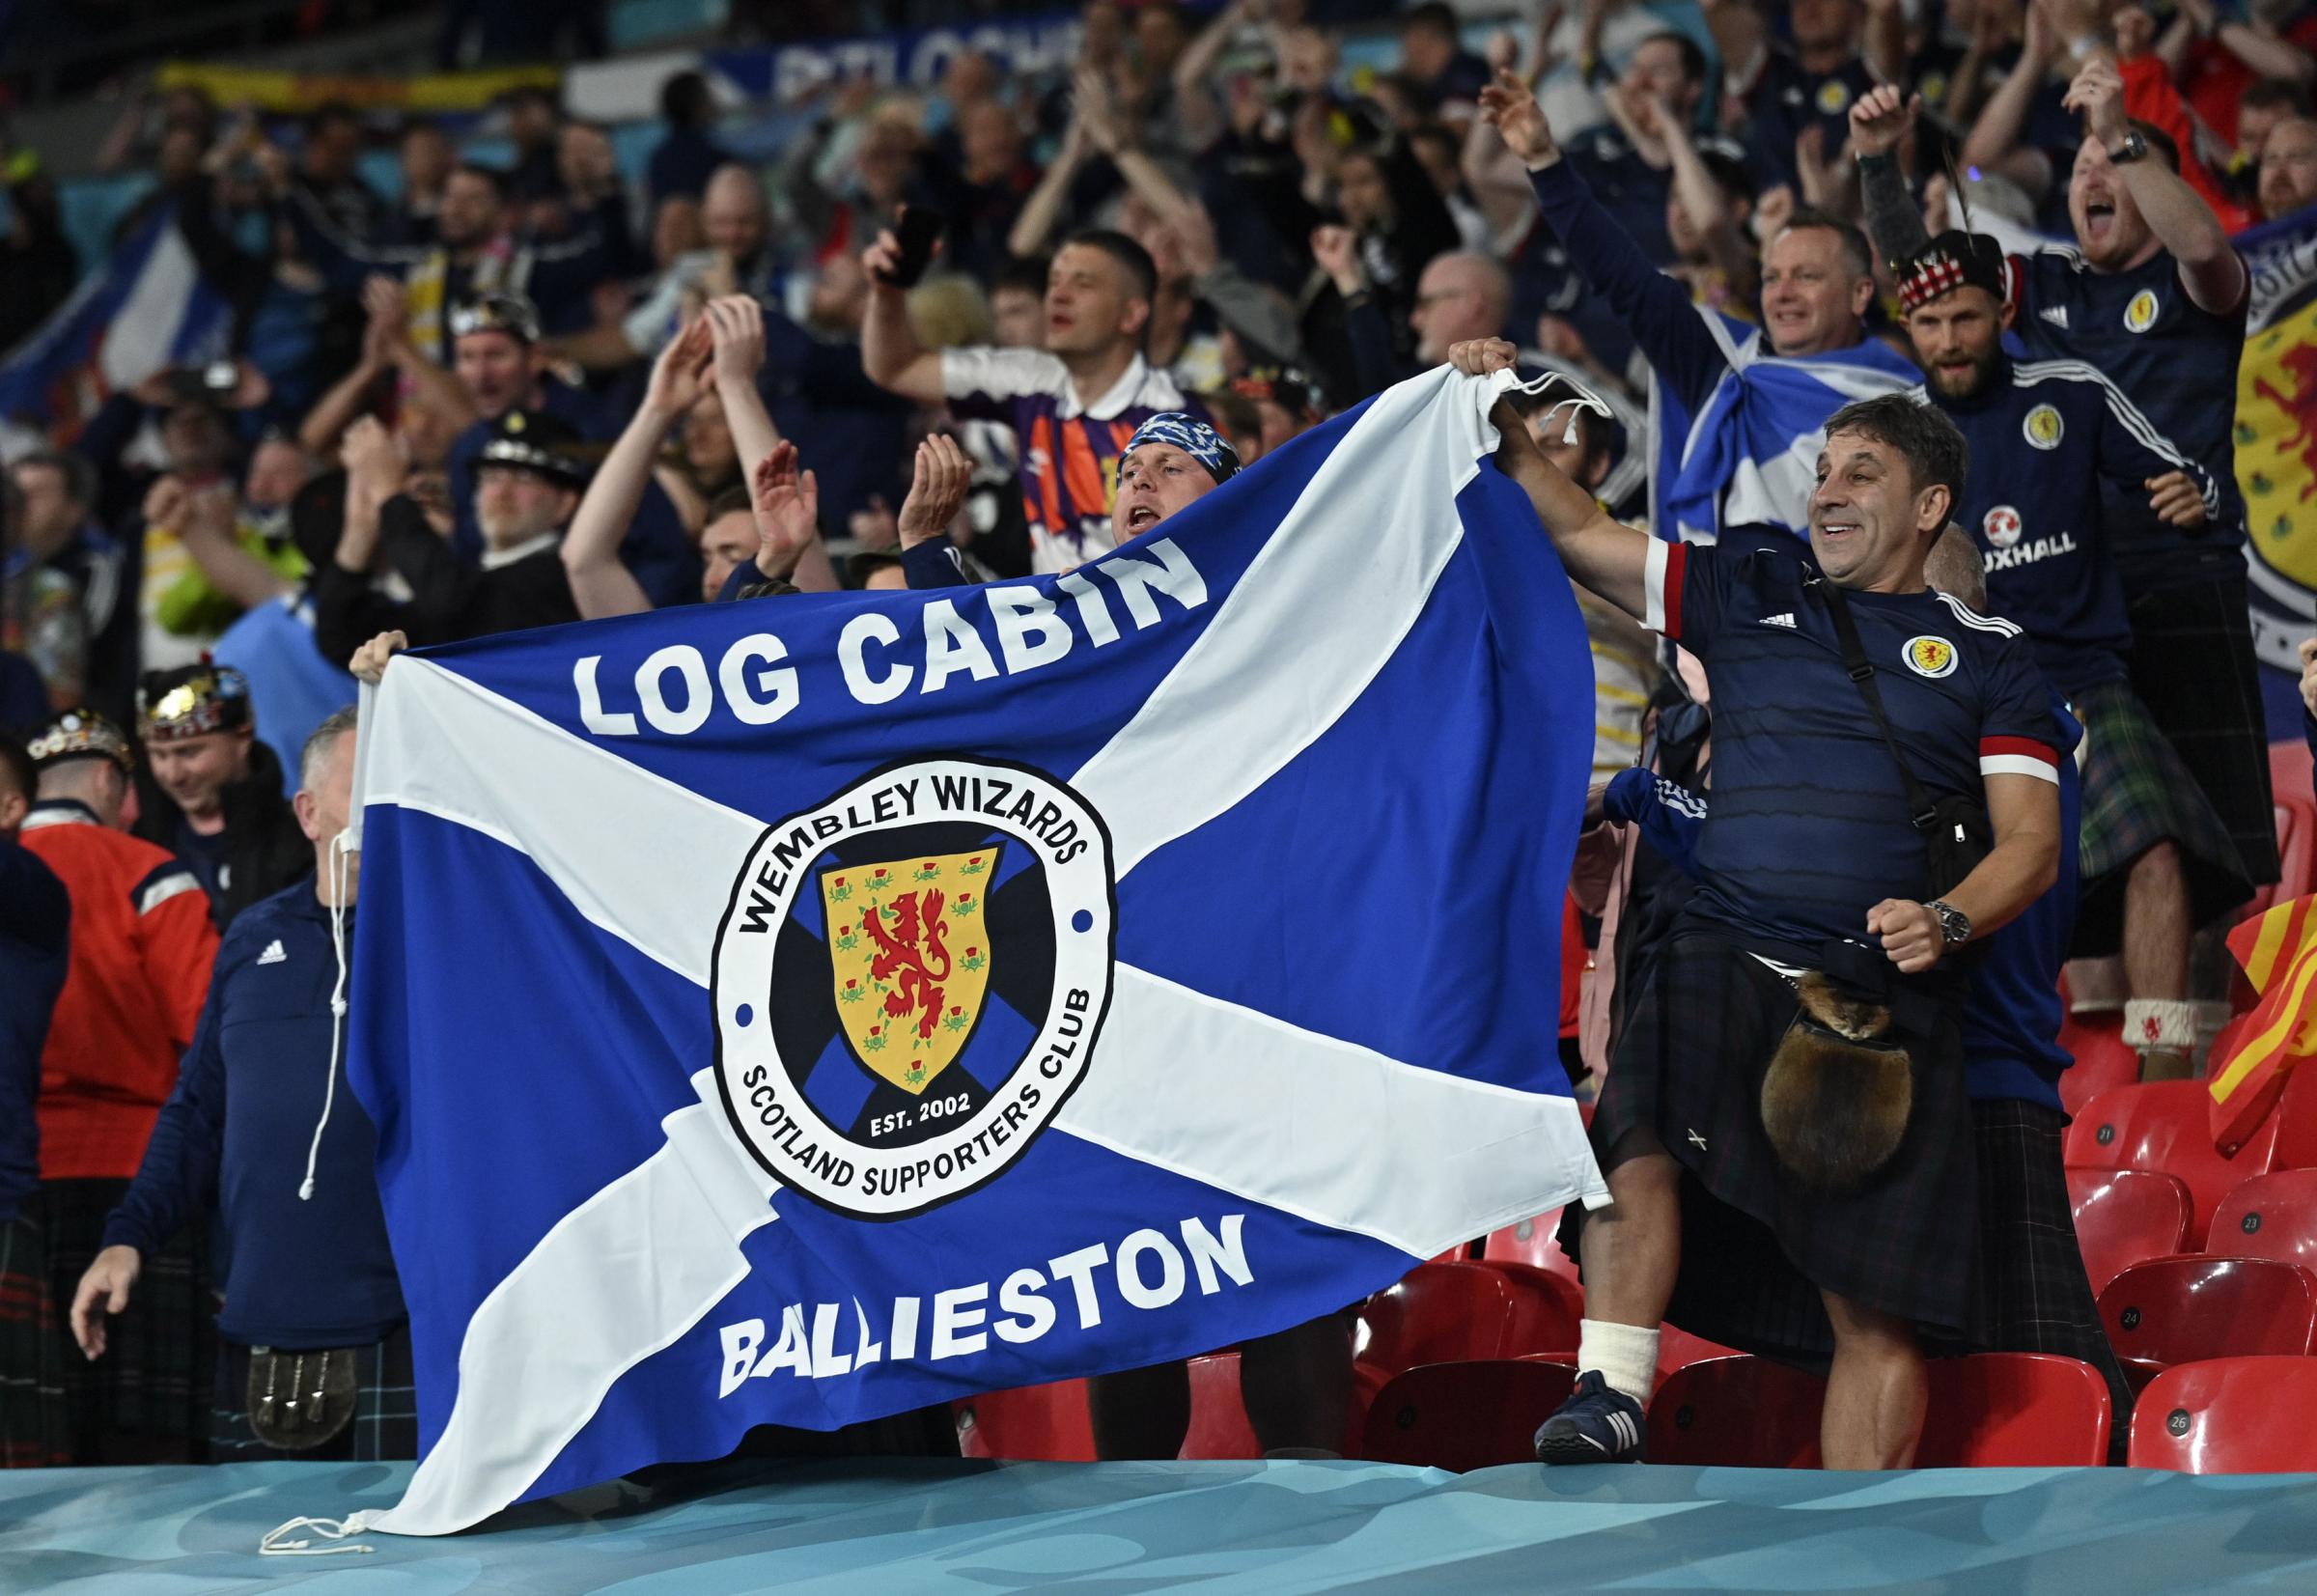 Scotland fans celebrate after the Euro 2020 soccer championship group D match between England and Scotland at Wembley stadium in London, Friday, June 18, 2021. (Justin Tallis/Pool via AP).